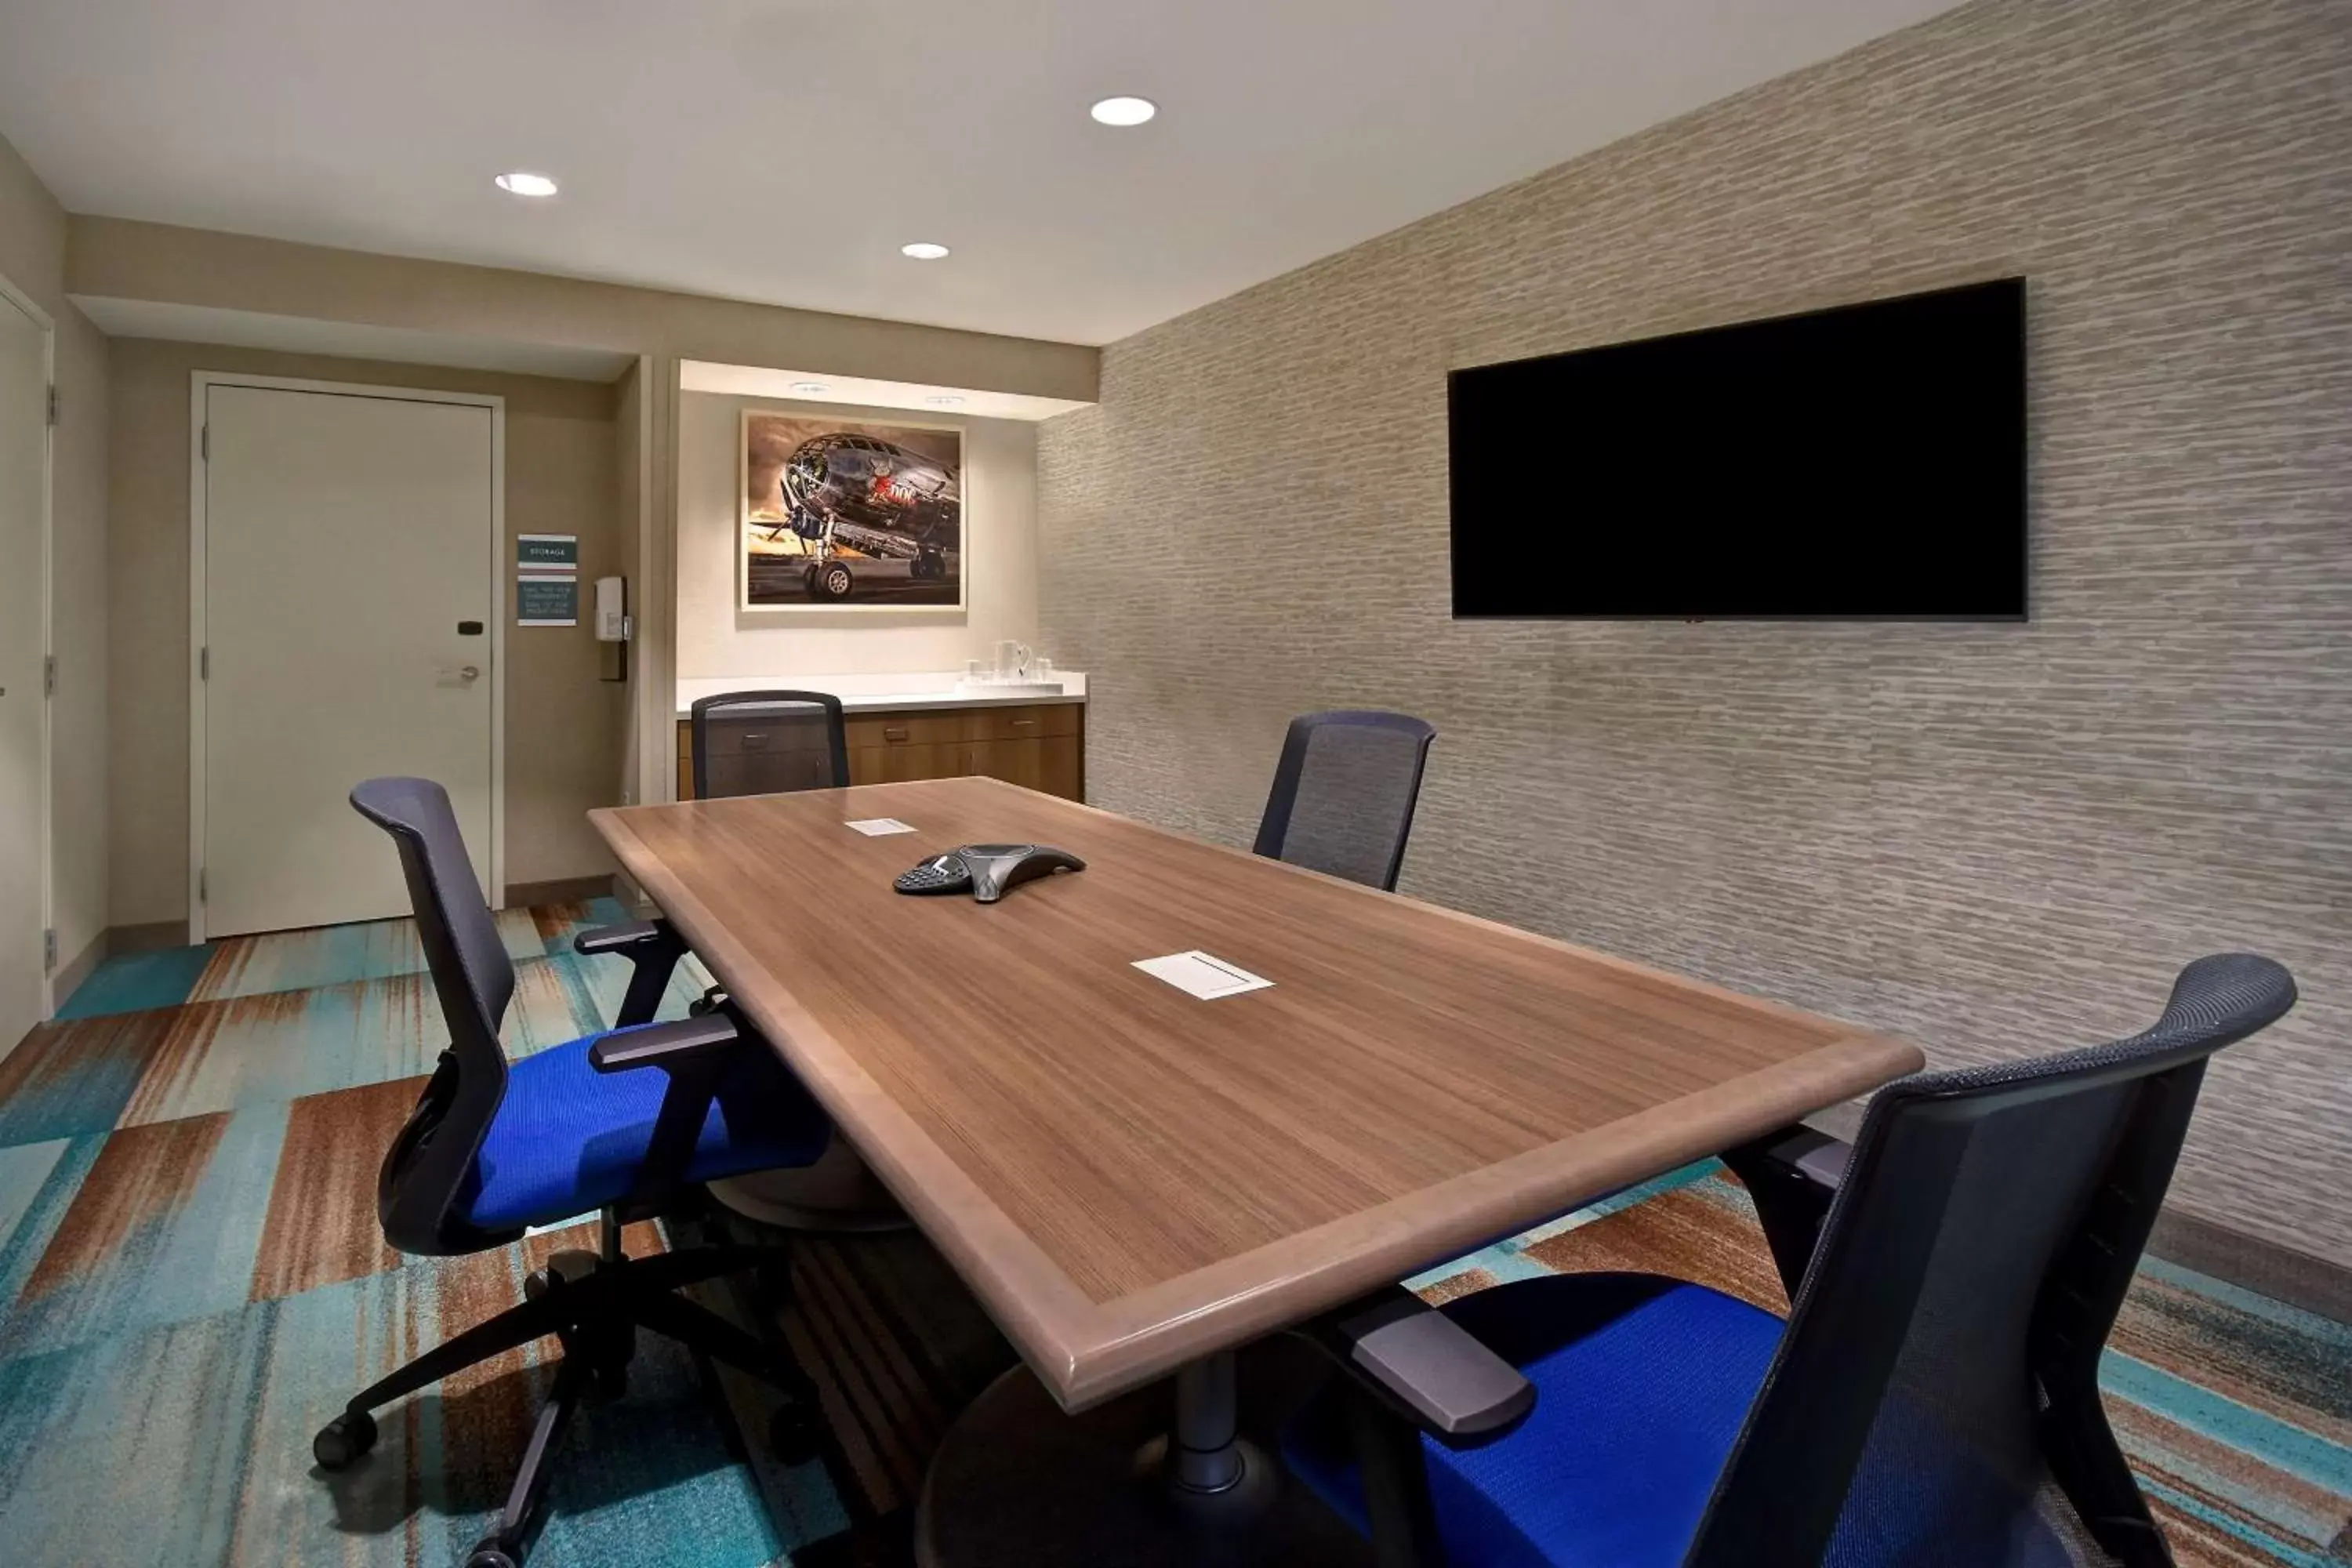 Meeting/conference room in Home2 Suites Wichita Downtown Delano, Ks